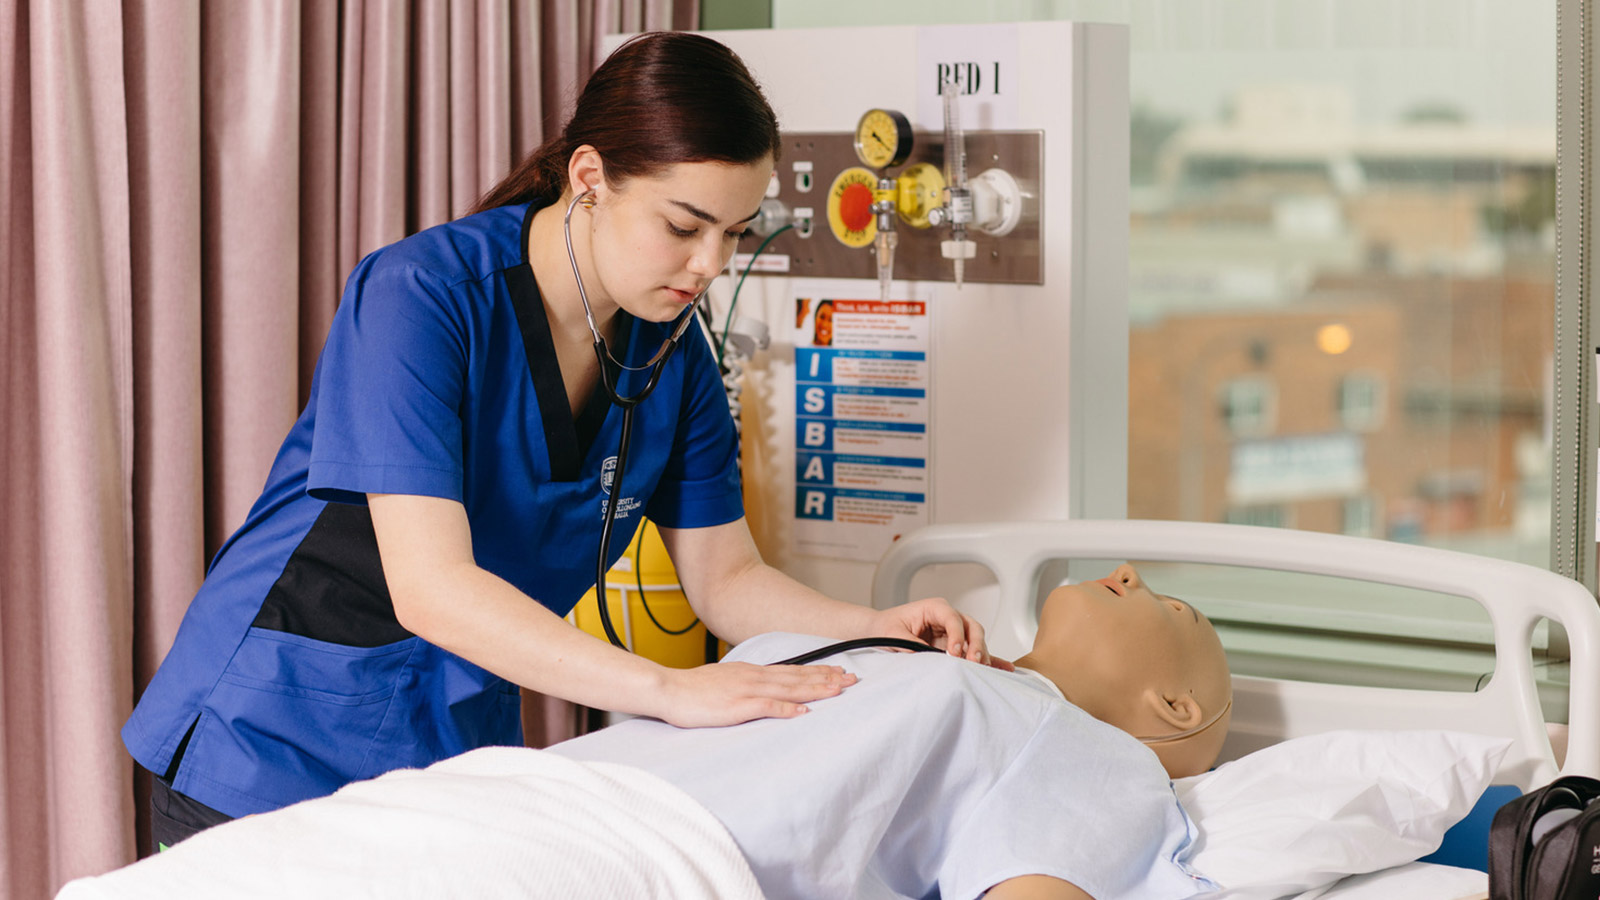 Angelique has pale skin and dark brown hair. She is in a nusing lab at UOW, wearing a dark blue uniform. She is using a stethoscope on a dummy patient.